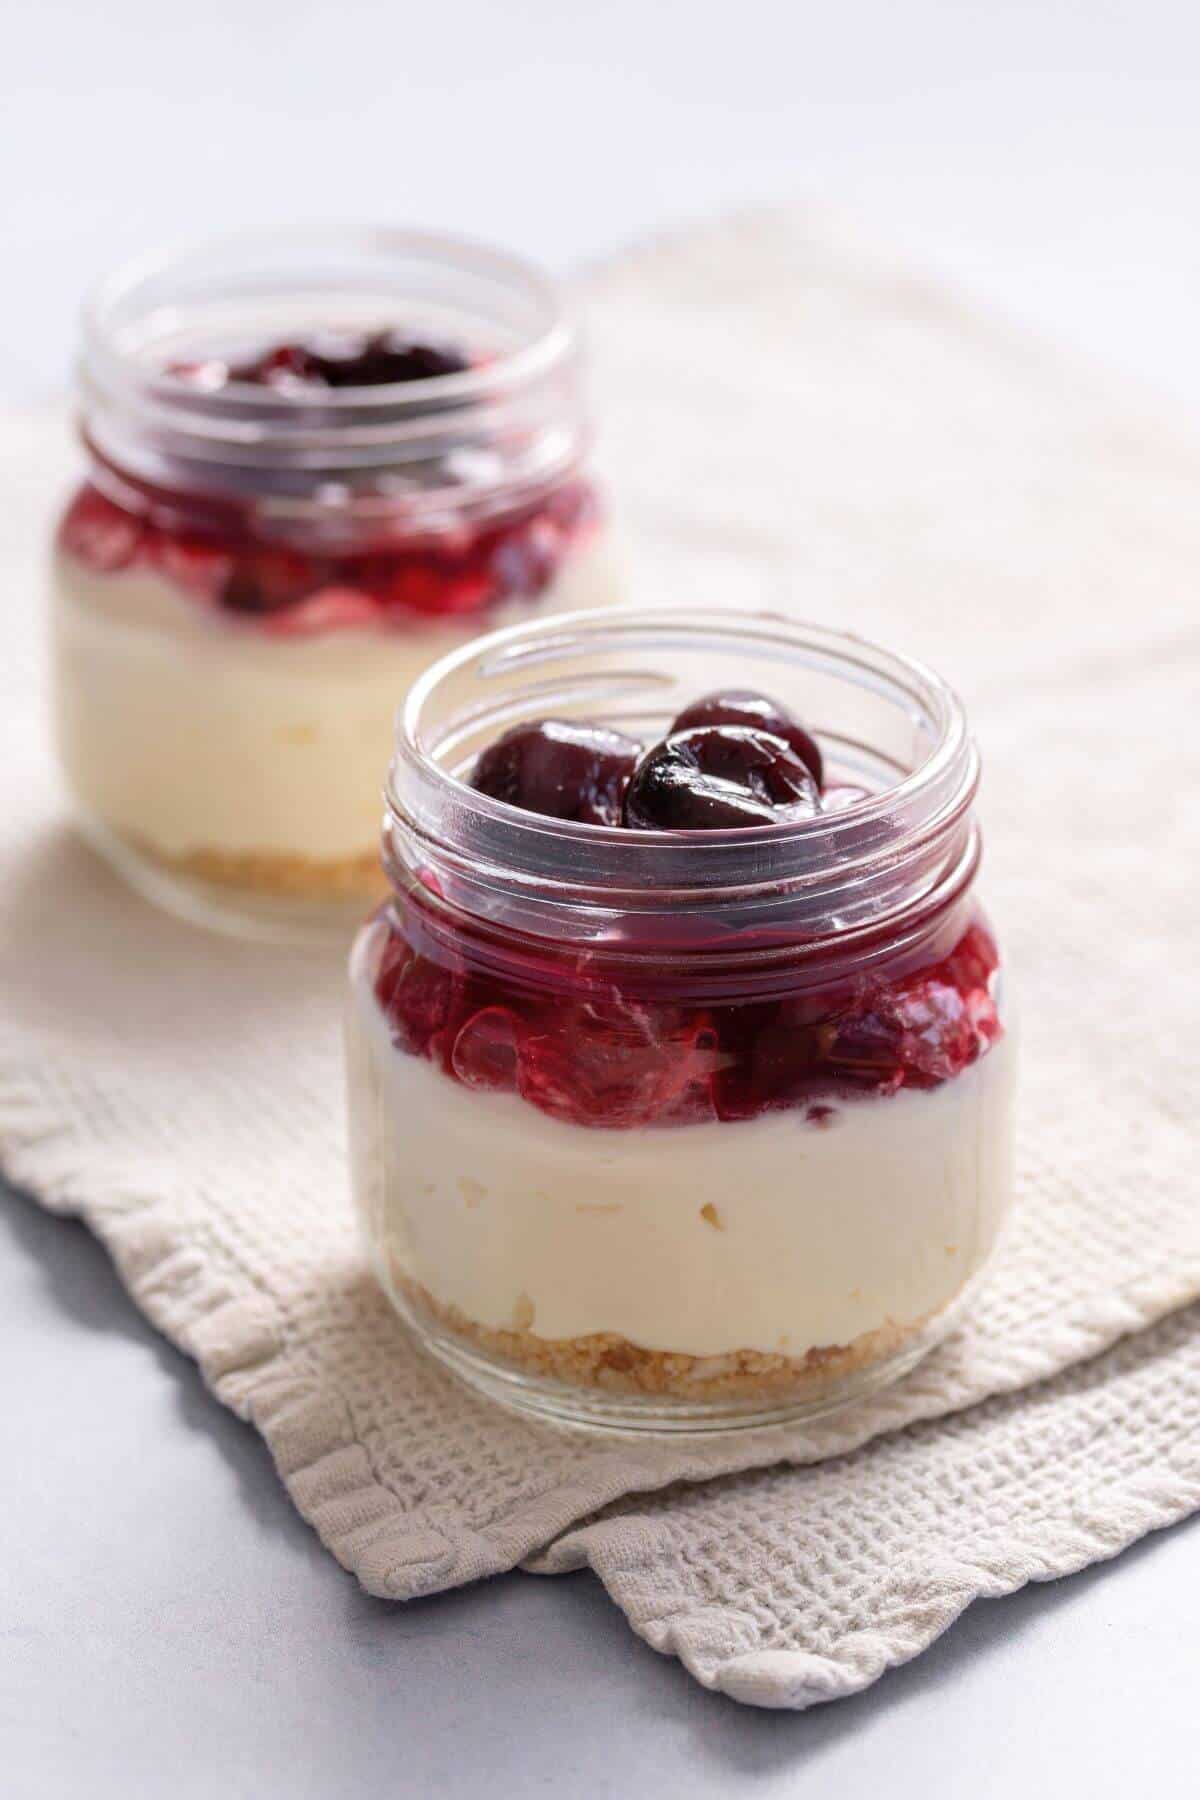 Cherry topping added to top of no-bake cheesecake in jars.